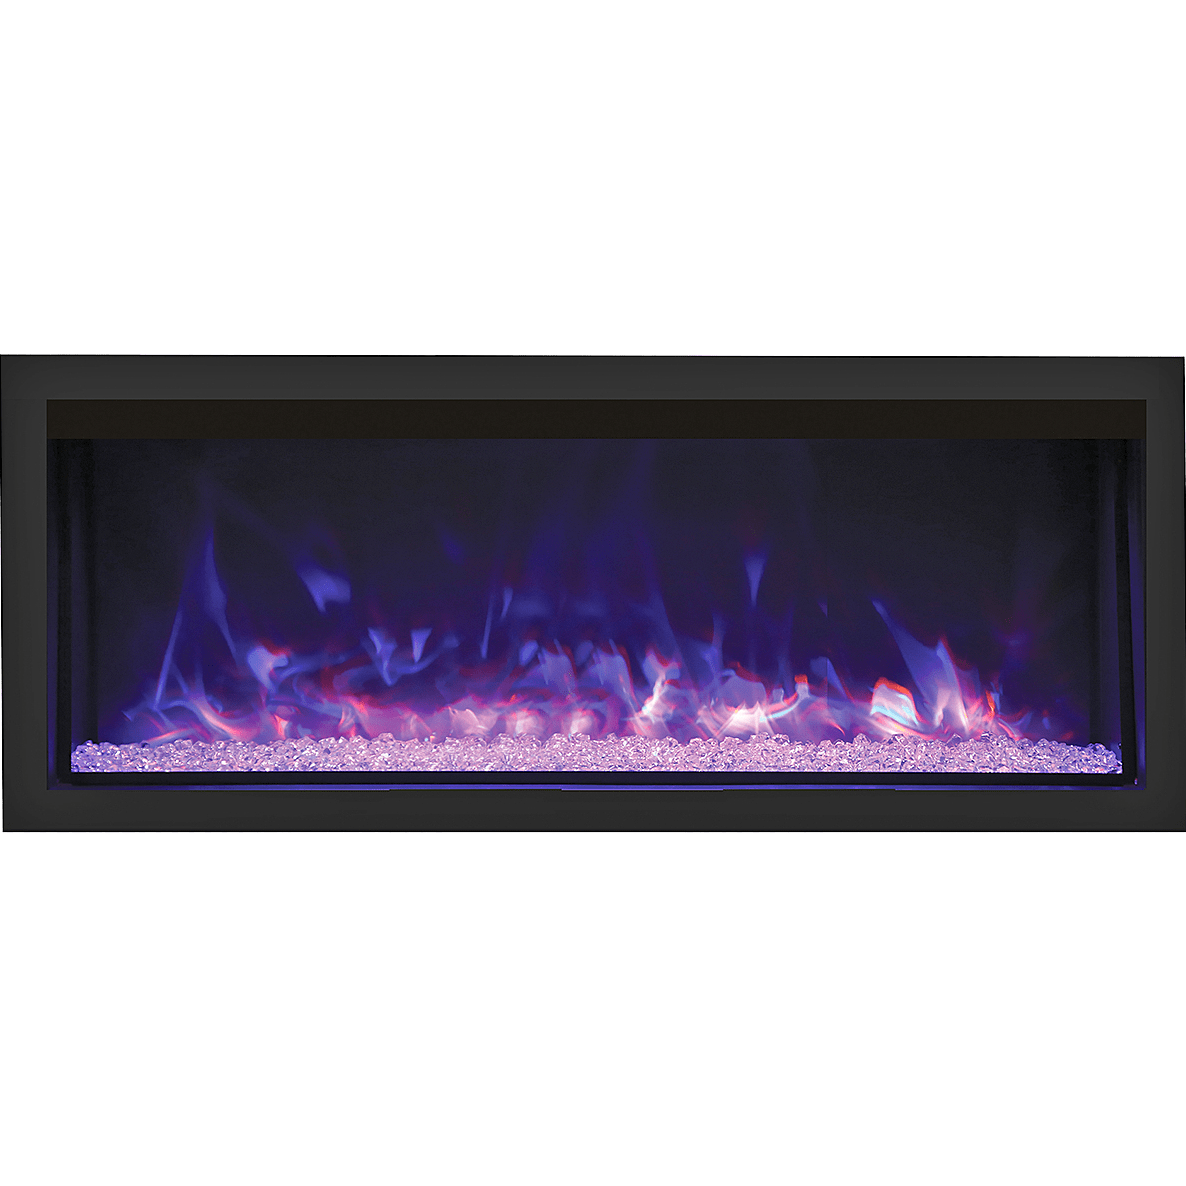 Remii Extra Tall Indoor/Outdoor Built-In Electric Fireplace - 55 Inch